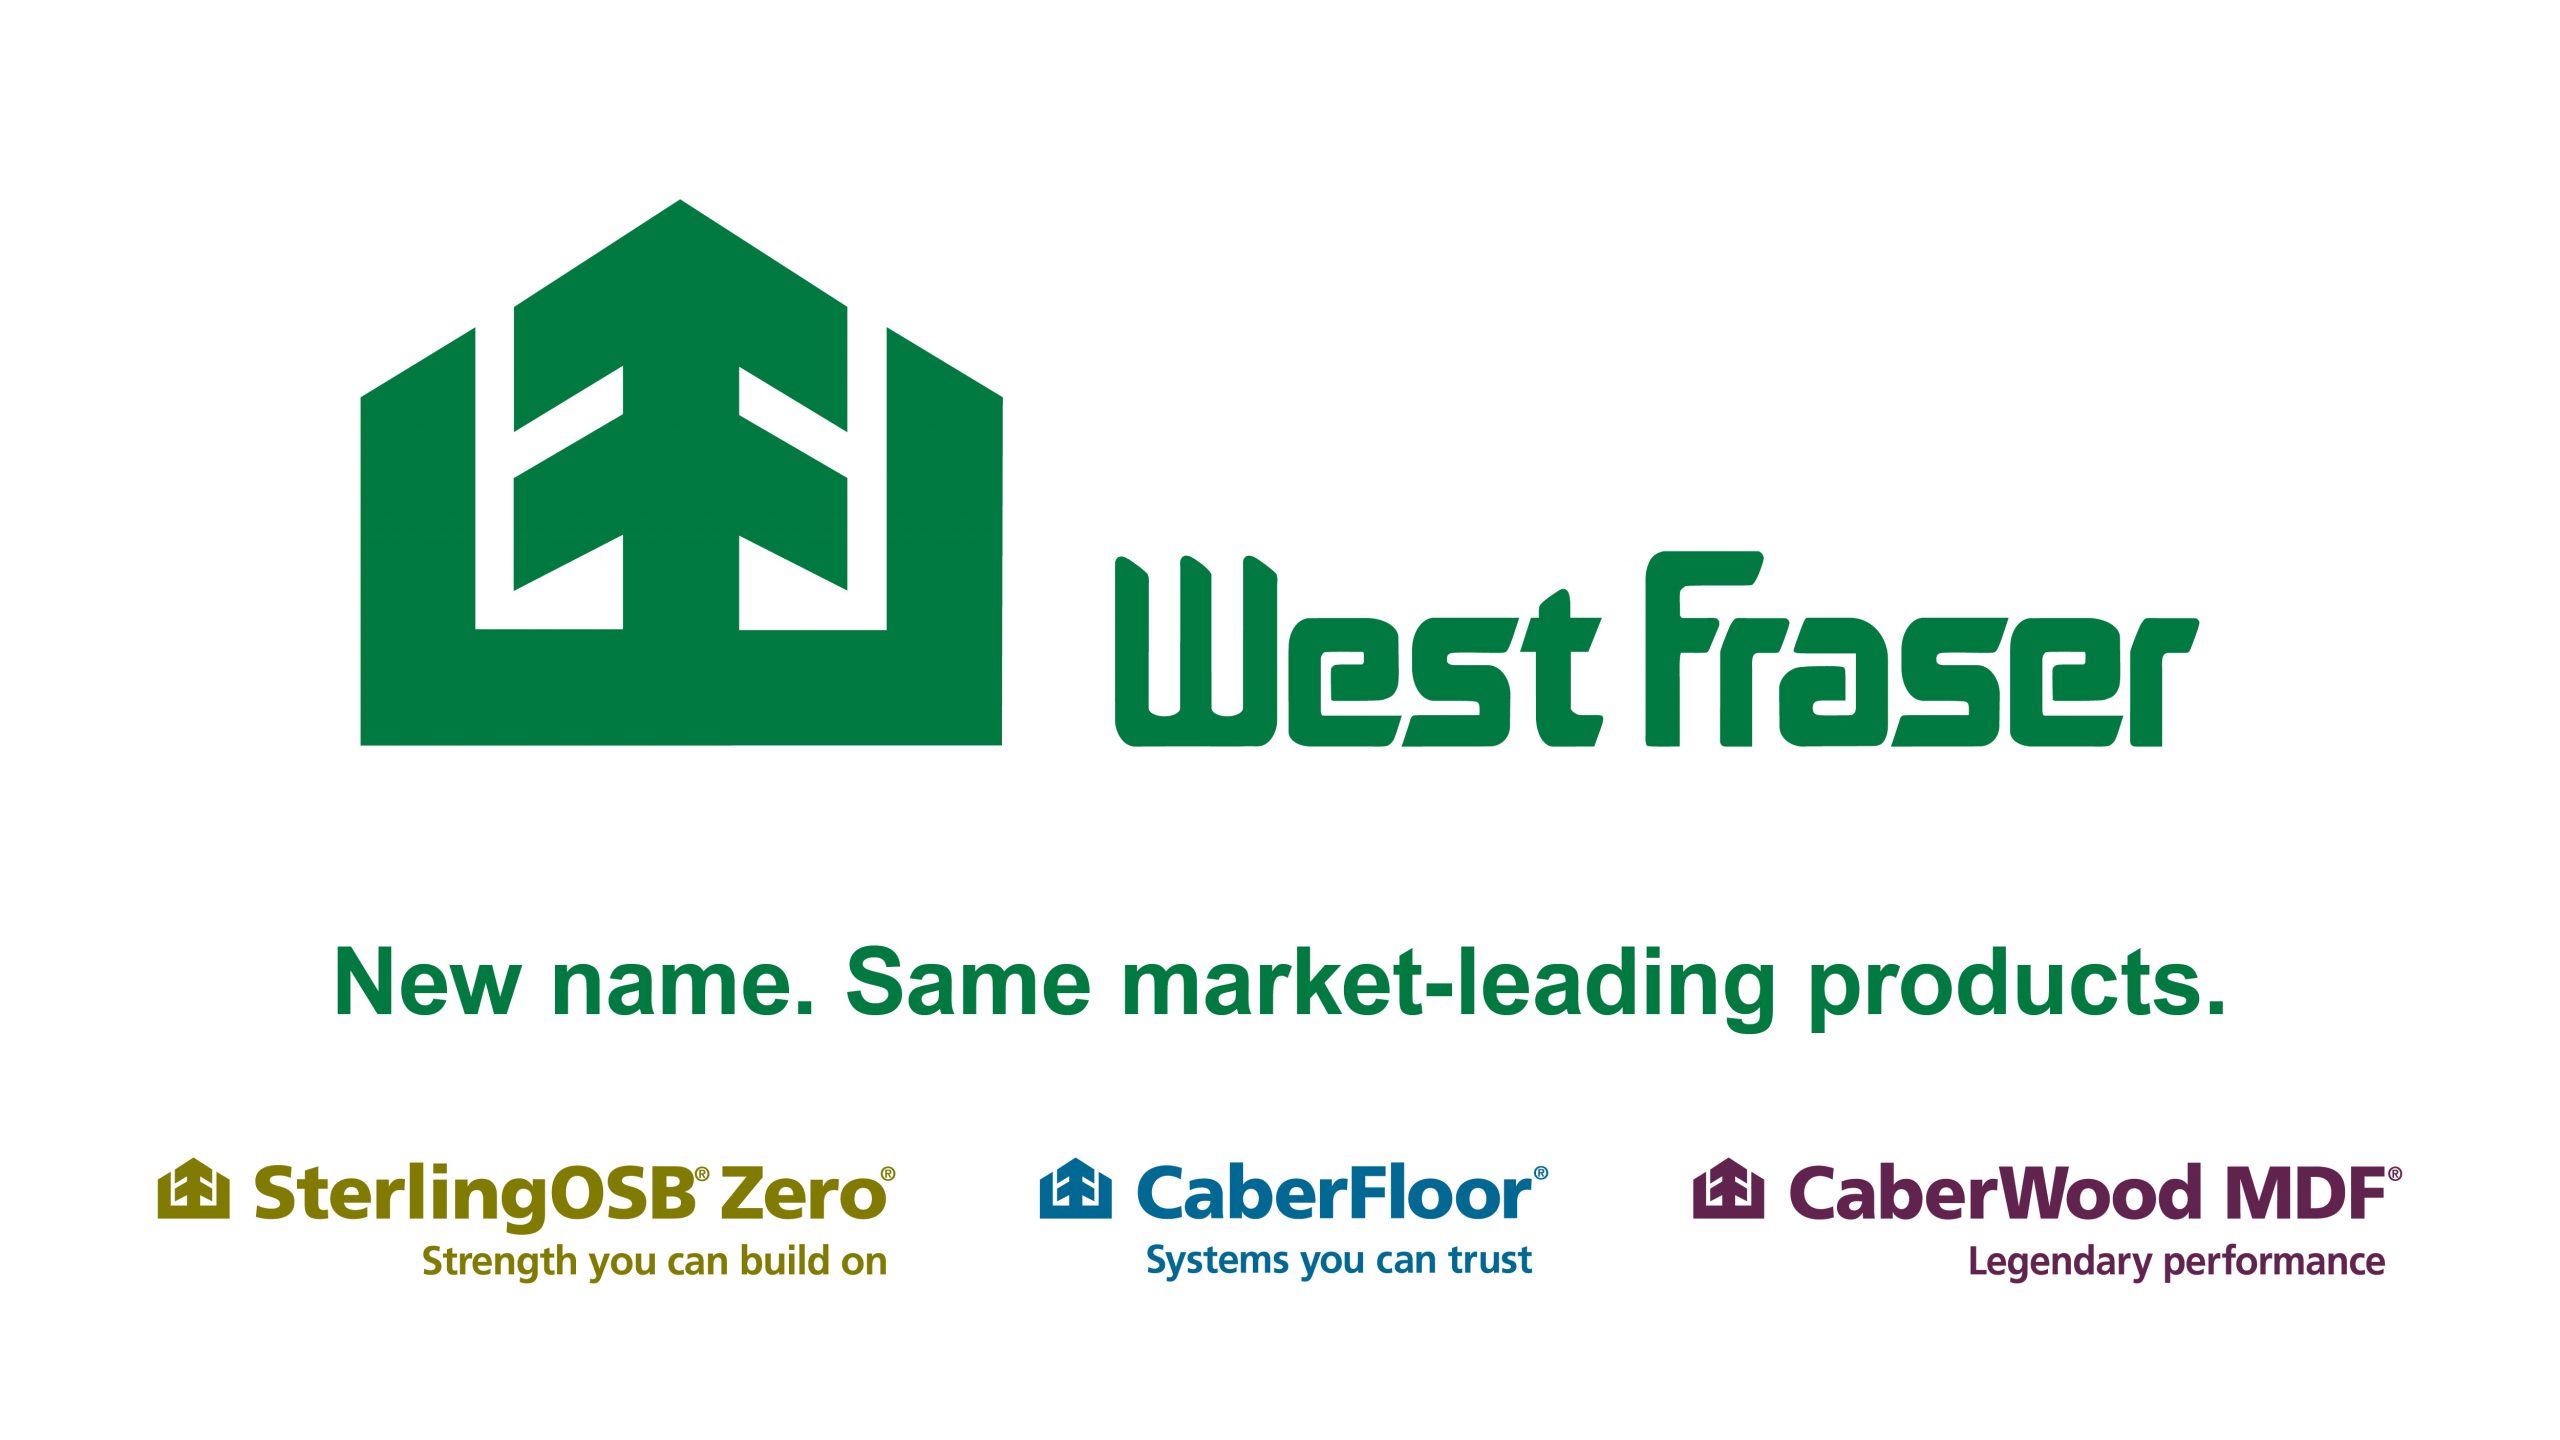 Norbord Europe is now part of West Fraser @WestFraserUK